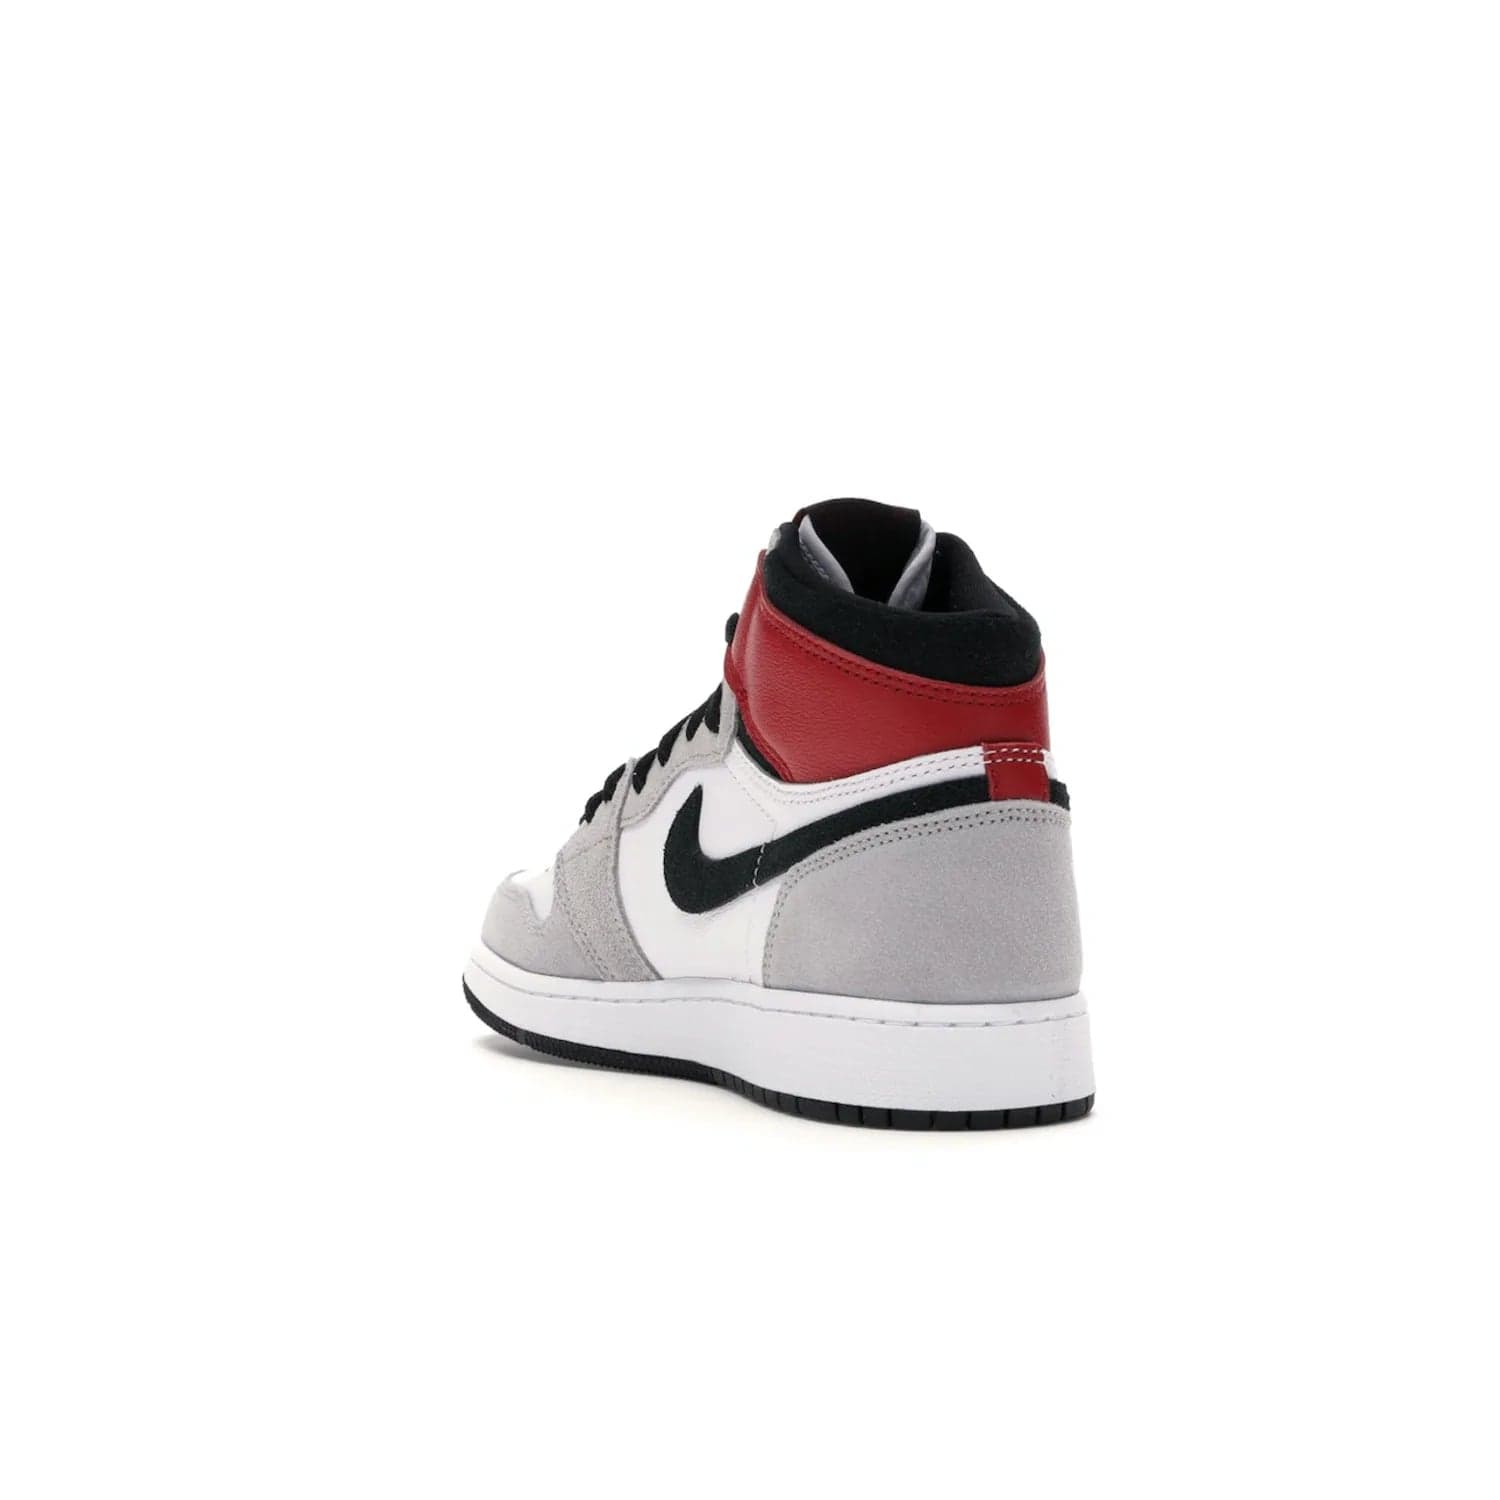 Jordan 1 Retro High Light Smoke Grey (GS) - Image 25 - Only at www.BallersClubKickz.com - Jordan 1 Retro High Light Smoke Grey (GS) features shades of grey, black, and Varsity Red with a bold silhouette. Premium white leather and suede overlays create a unique look. Released July 2020, offering style and performance. Perfect sneaker for any collector or fan.